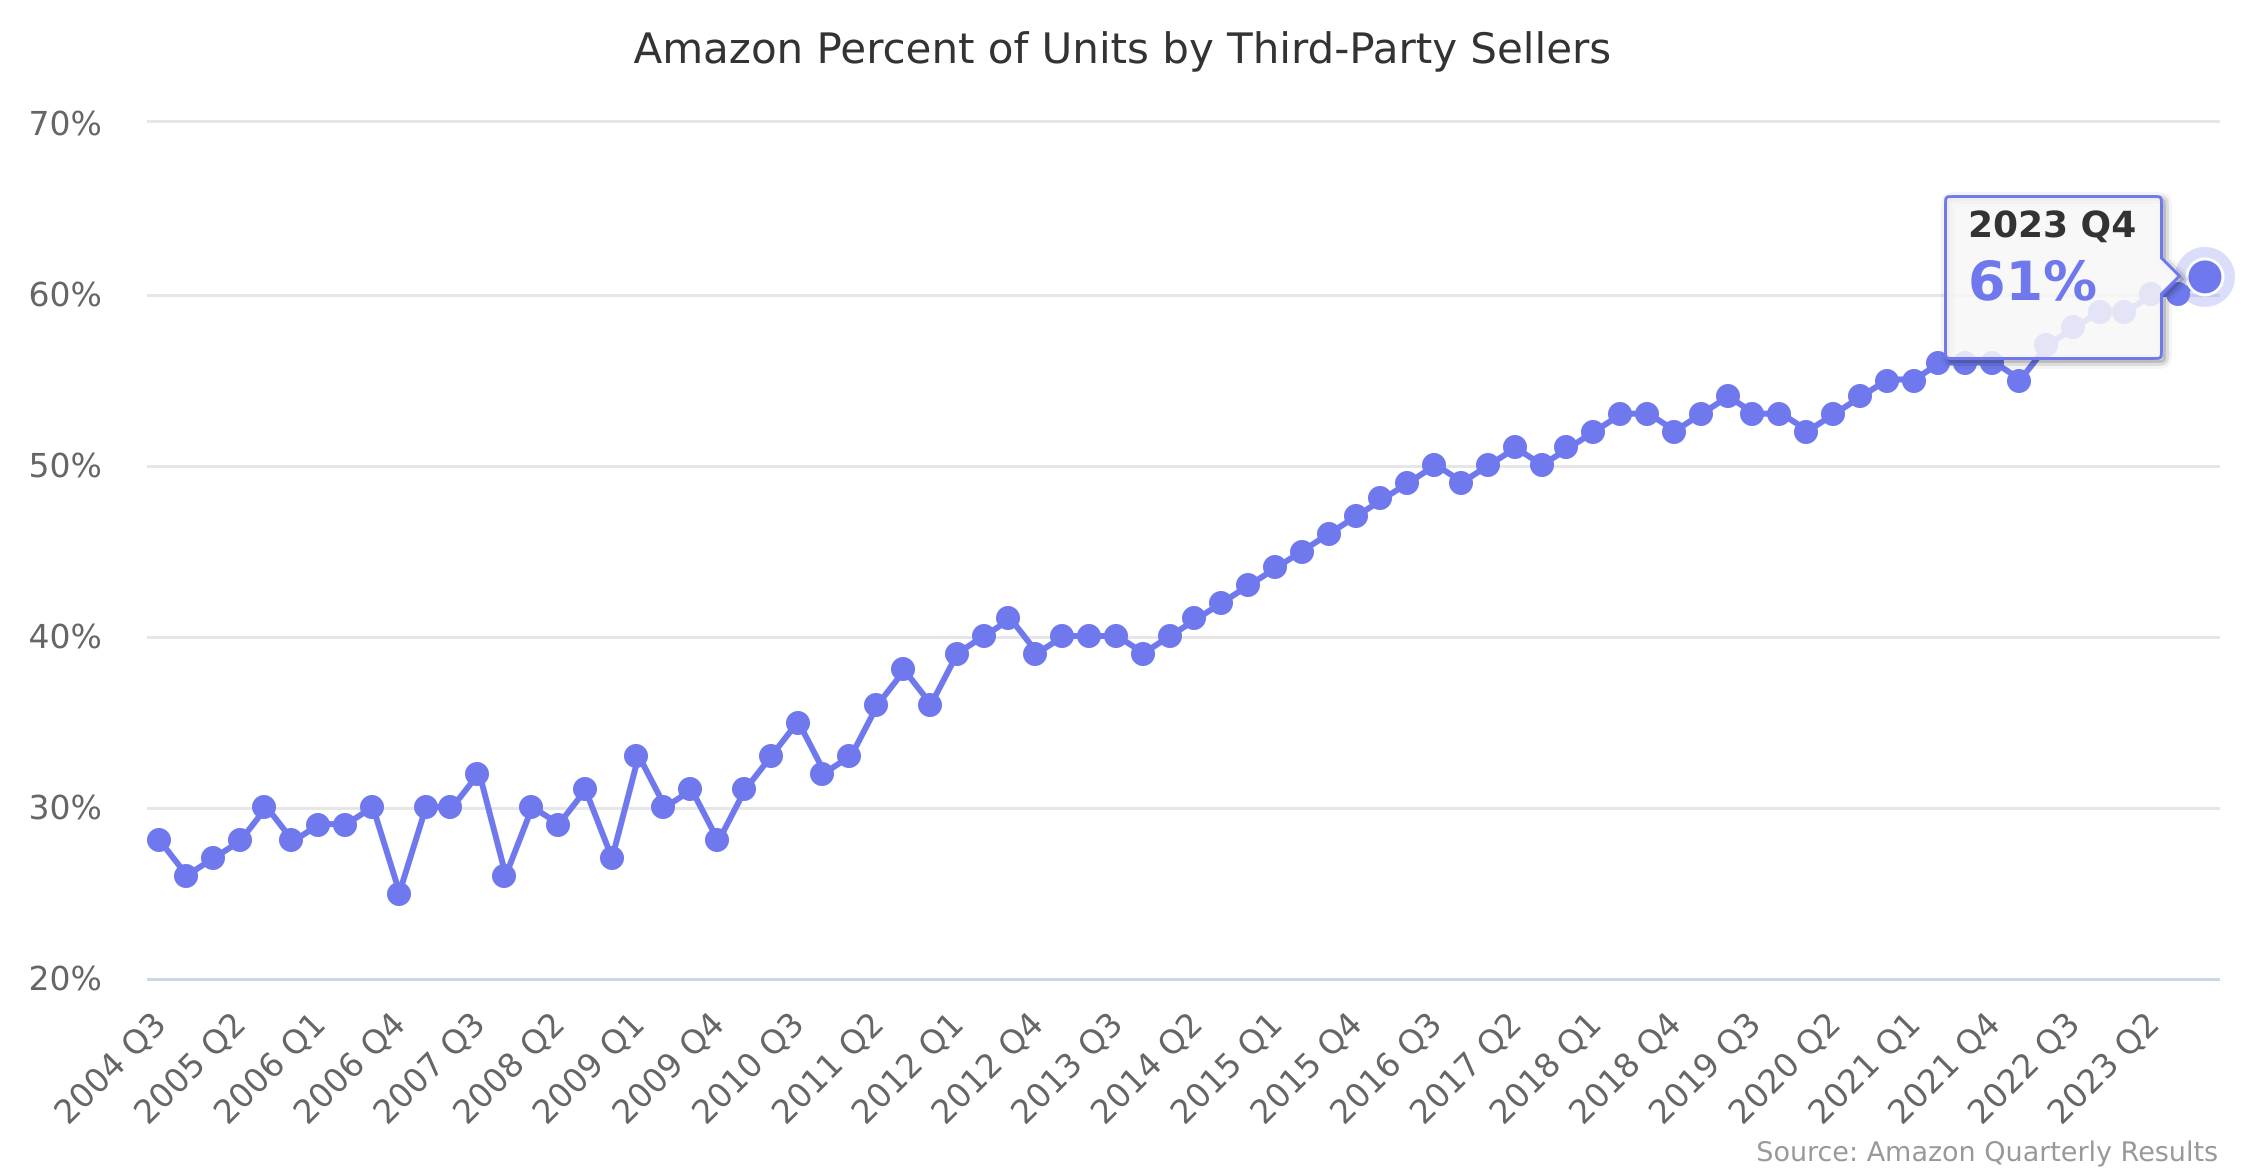 Amazon Percent of Units by Third-Party Sellers